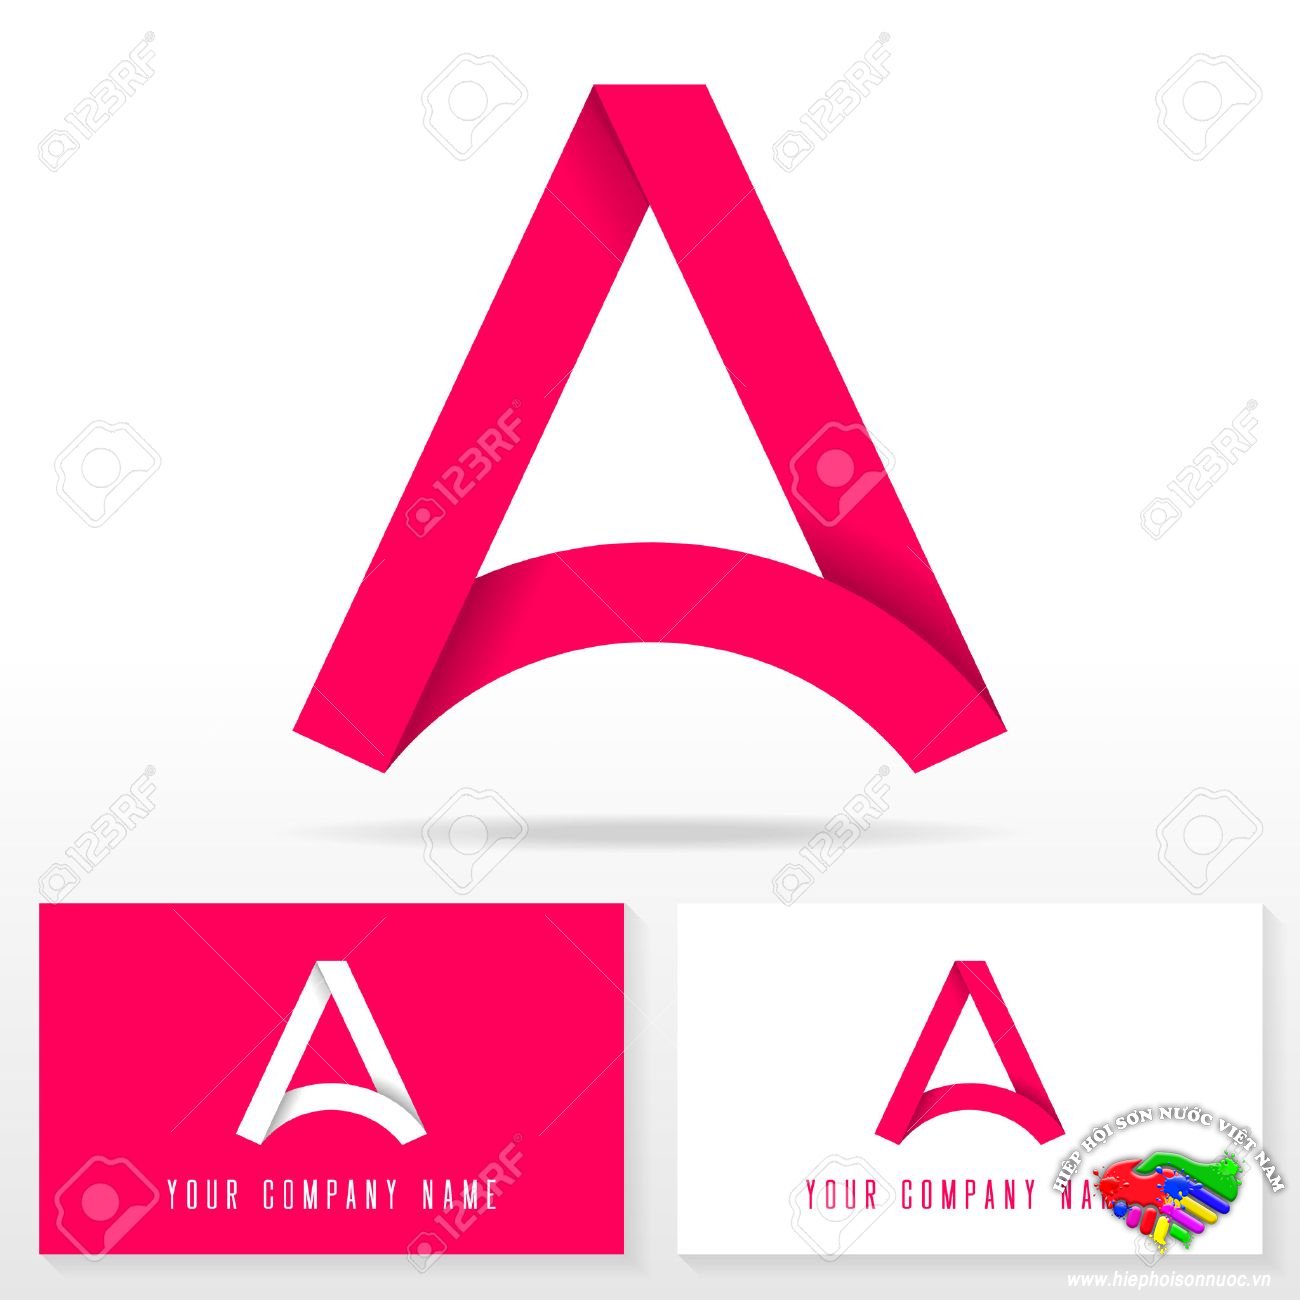 40342038-letter-a-icon-design-template-elements.jpg